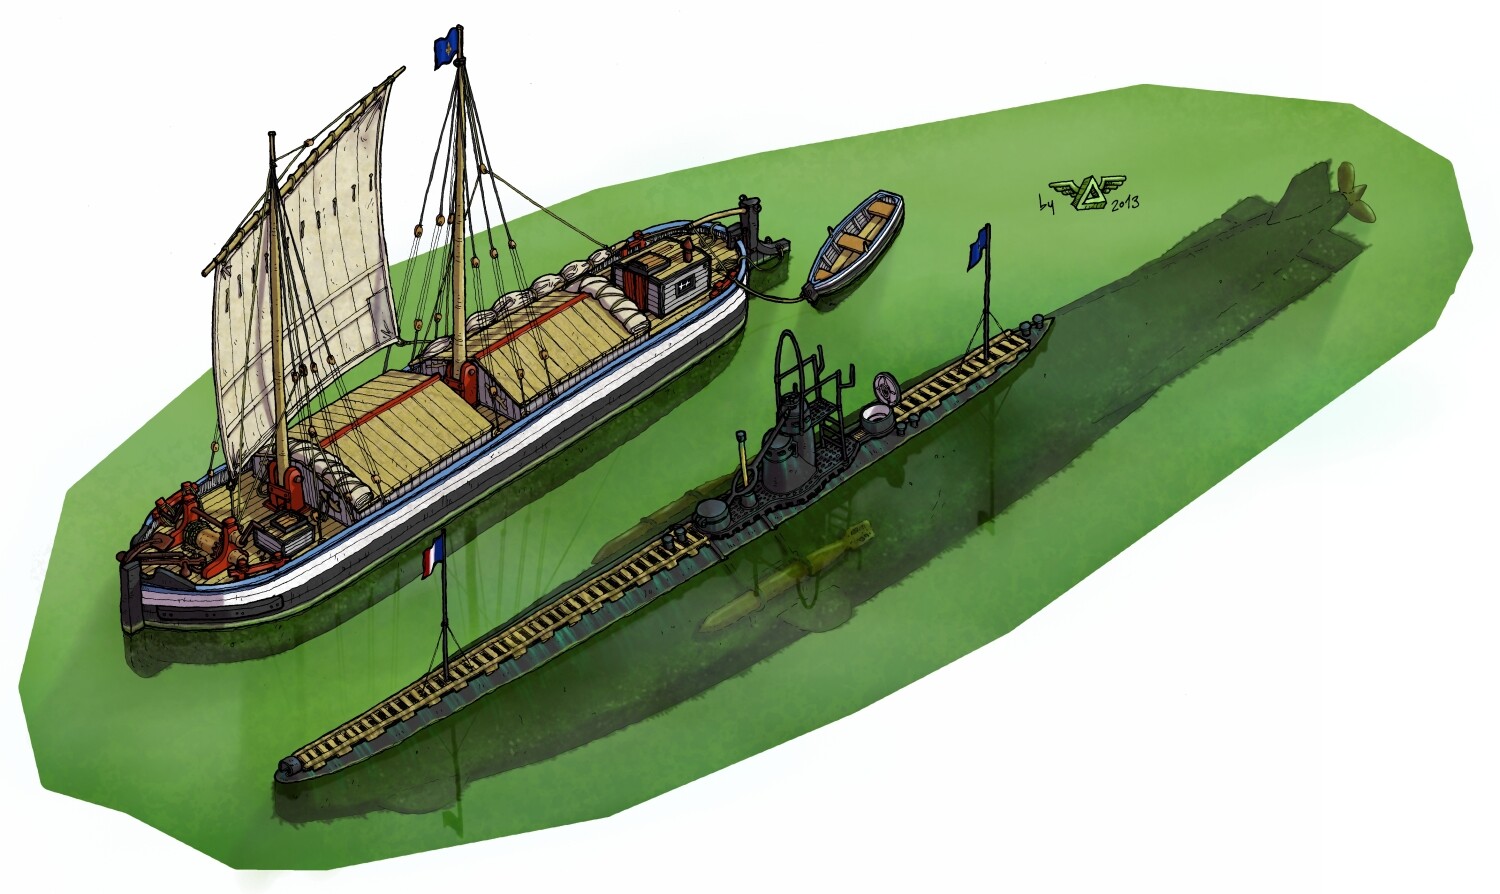 A reference drawing of French submarine Gustave Zédé and canal boat Belle Lurette.